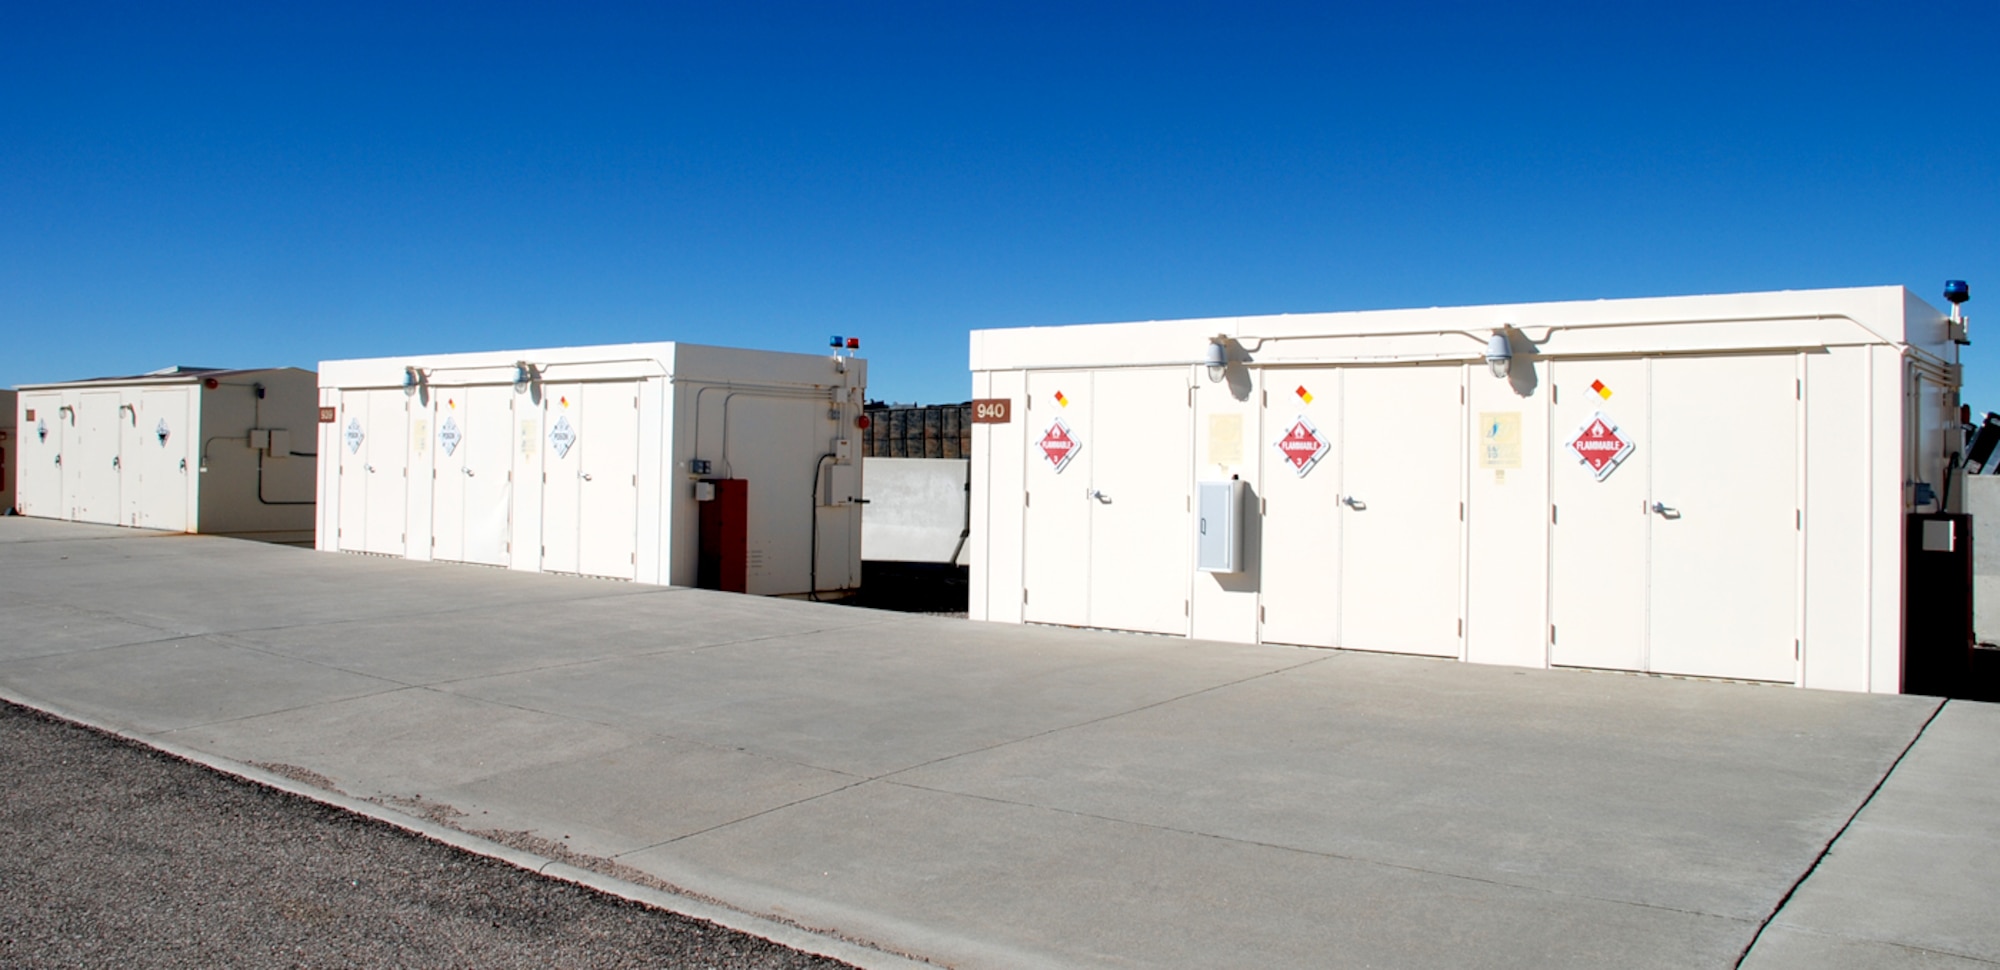 The hazardous waste facility, located at Bldg. 944, houses hazardous materials in storage units until being picked up for disposal (Photo by Airman 1st Class Daryl Knee).